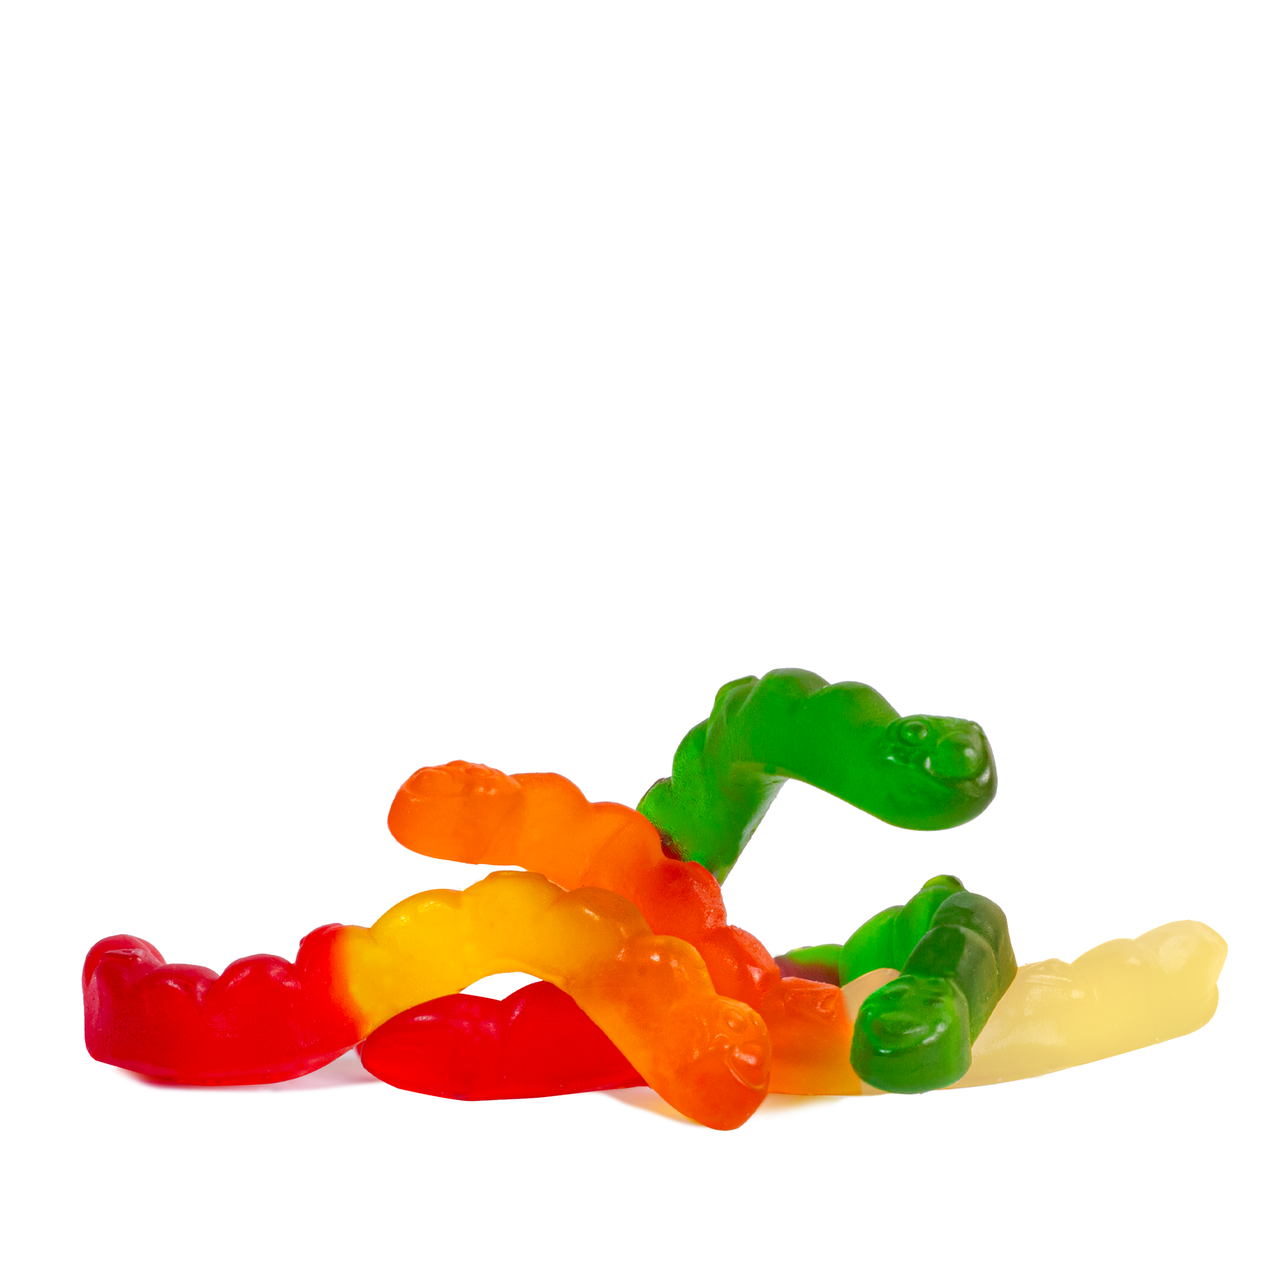 https://cdn11.bigcommerce.com/s-riqk6cih6h/images/stencil/1280x1280/products/346/2404/50102_albanese-large-assorted-fruit-gummi-worms__27237.1707232780.png?c=1